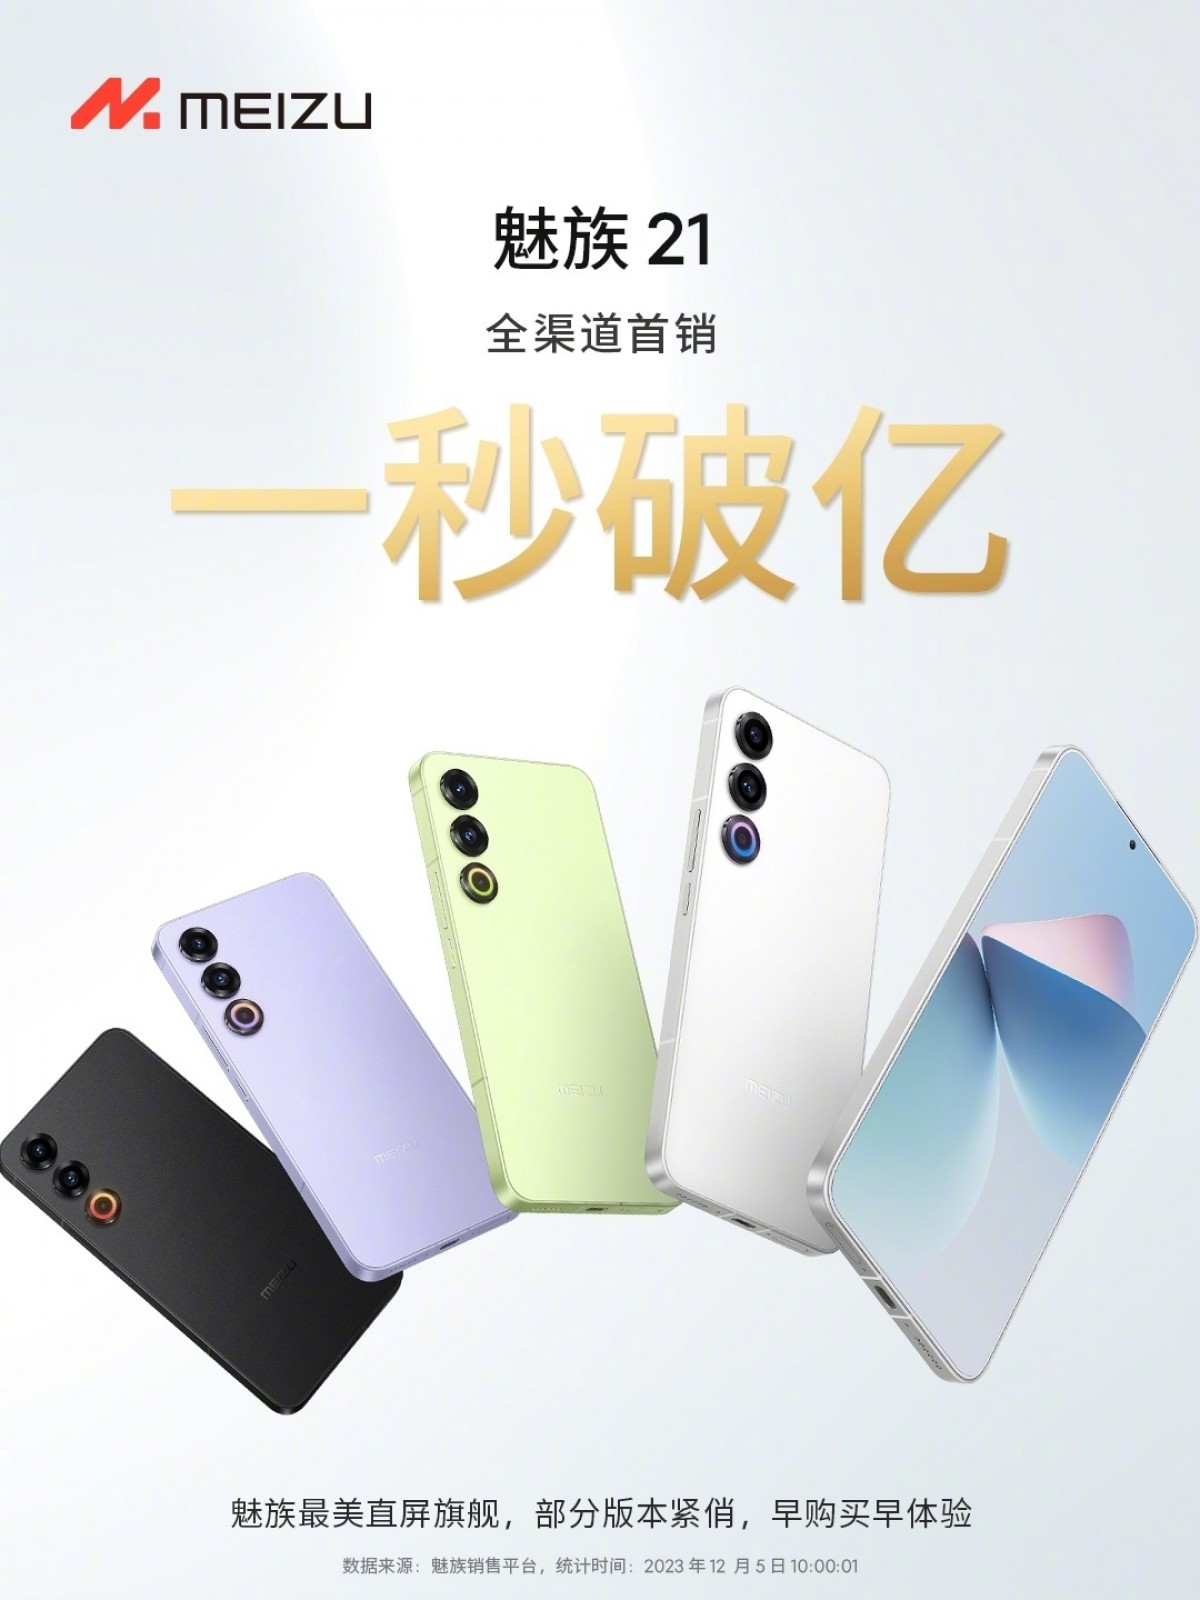 Meizu 21 reached CNY 100 million in sales, says the poster